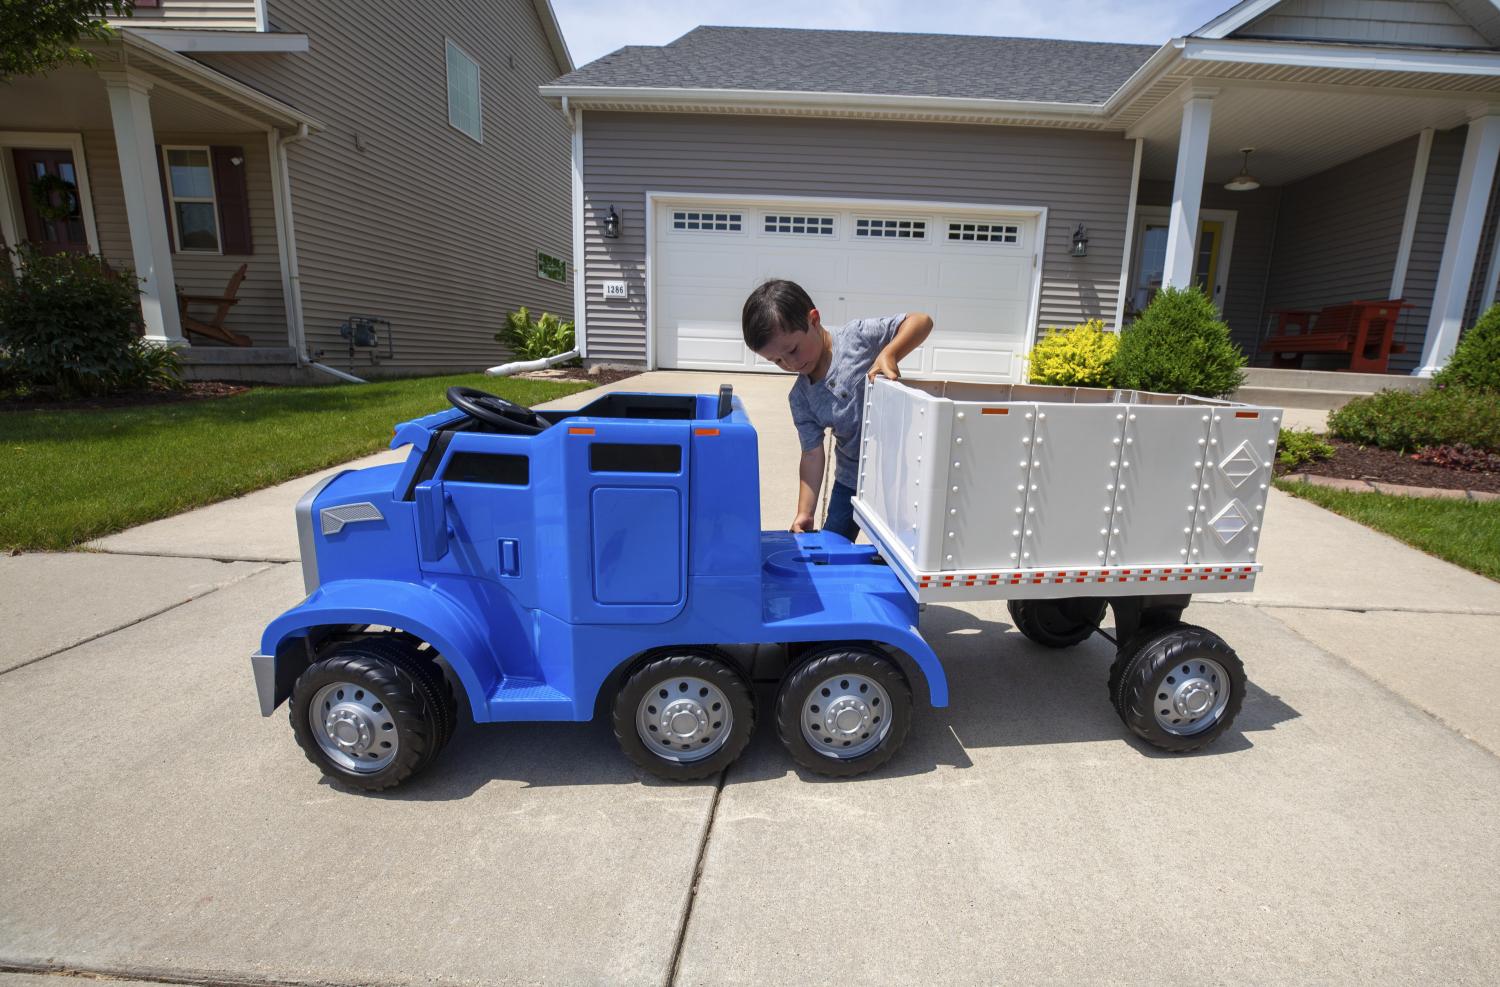 Electric Semi-Truck Ride-On Toy - Kids ride-on Big-Rig electric powered toy car